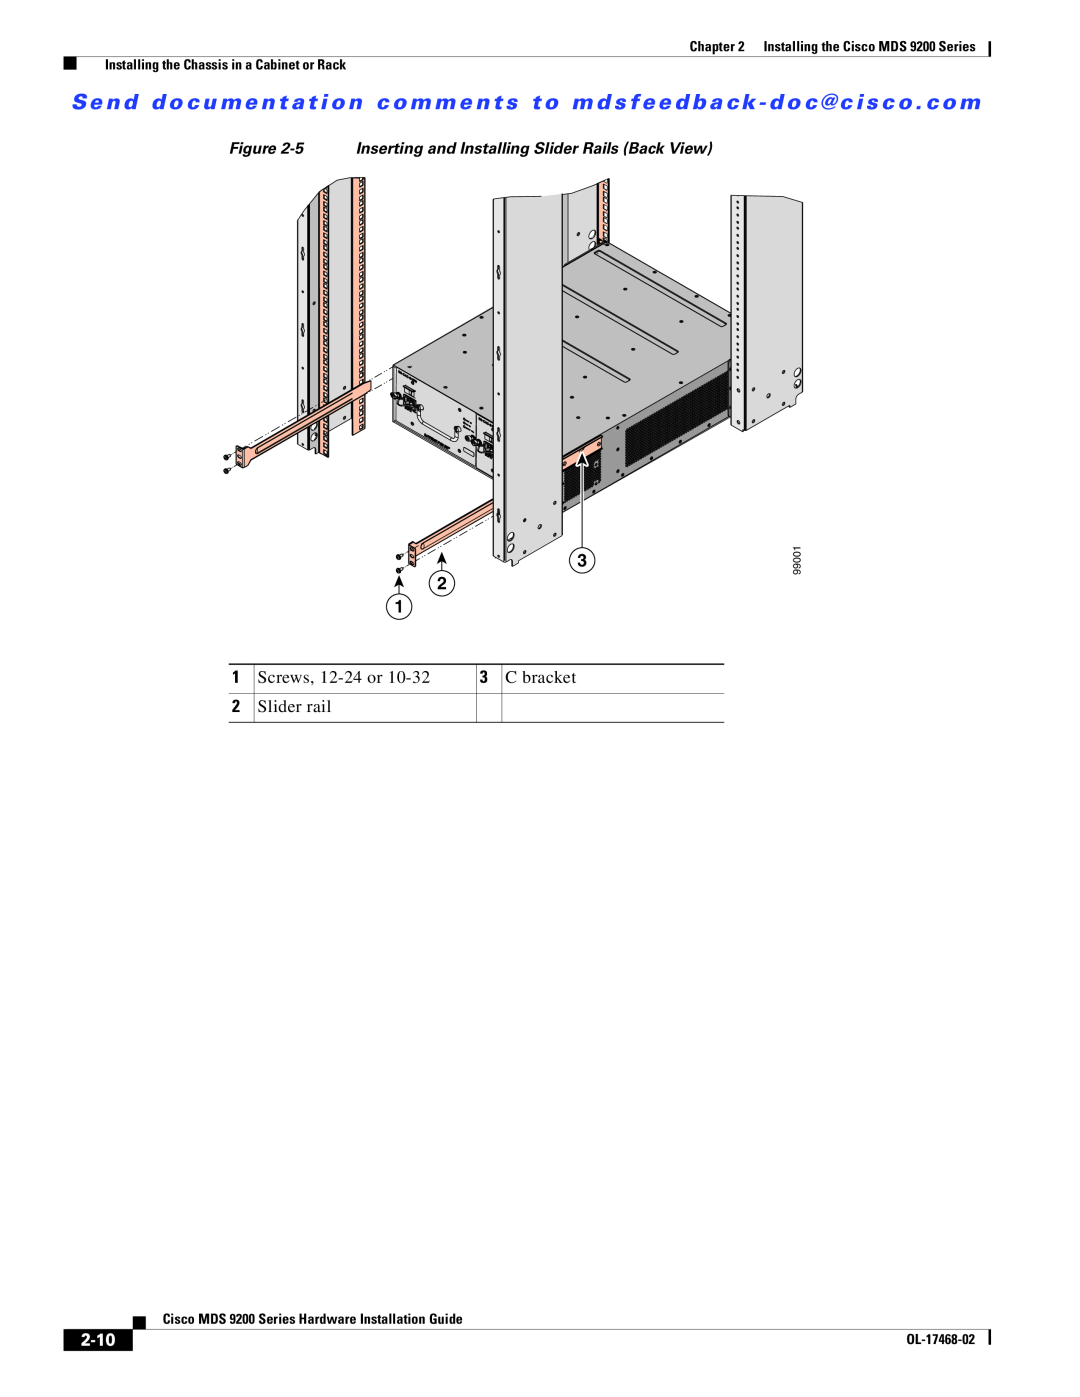 Cisco Systems MDS 9200 Series manual 2-10, 5 Inserting and Installing Slider Rails Back View, 99001, OL-17468-02 